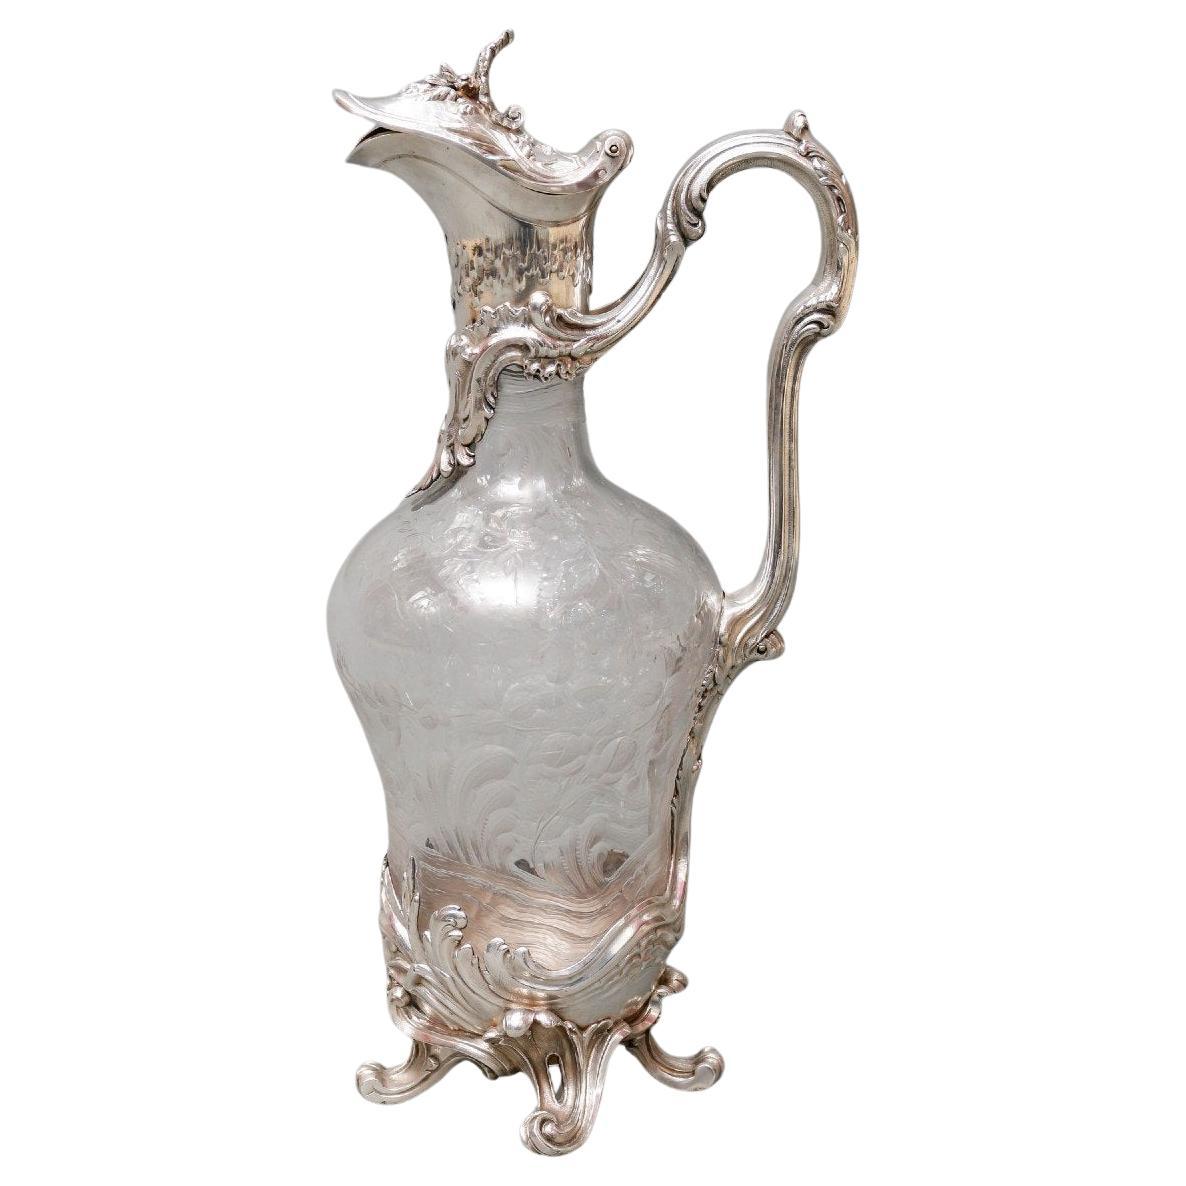 Boin Taburet – Ewer In Engraved Crystal And Solid Silver 19th Century For Sale